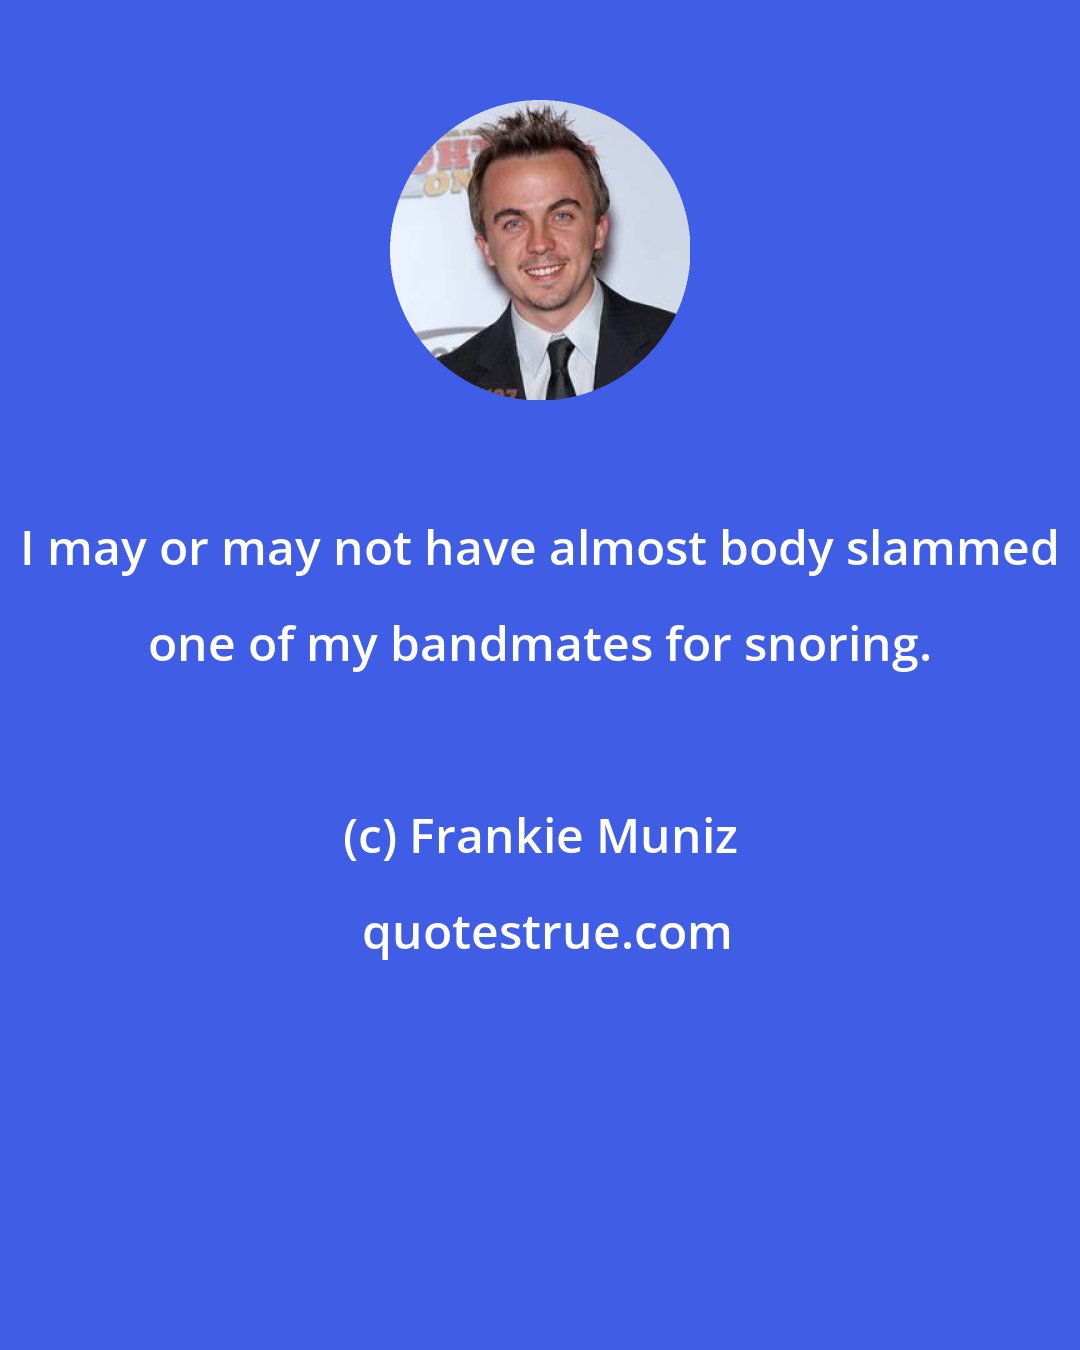 Frankie Muniz: I may or may not have almost body slammed one of my bandmates for snoring.